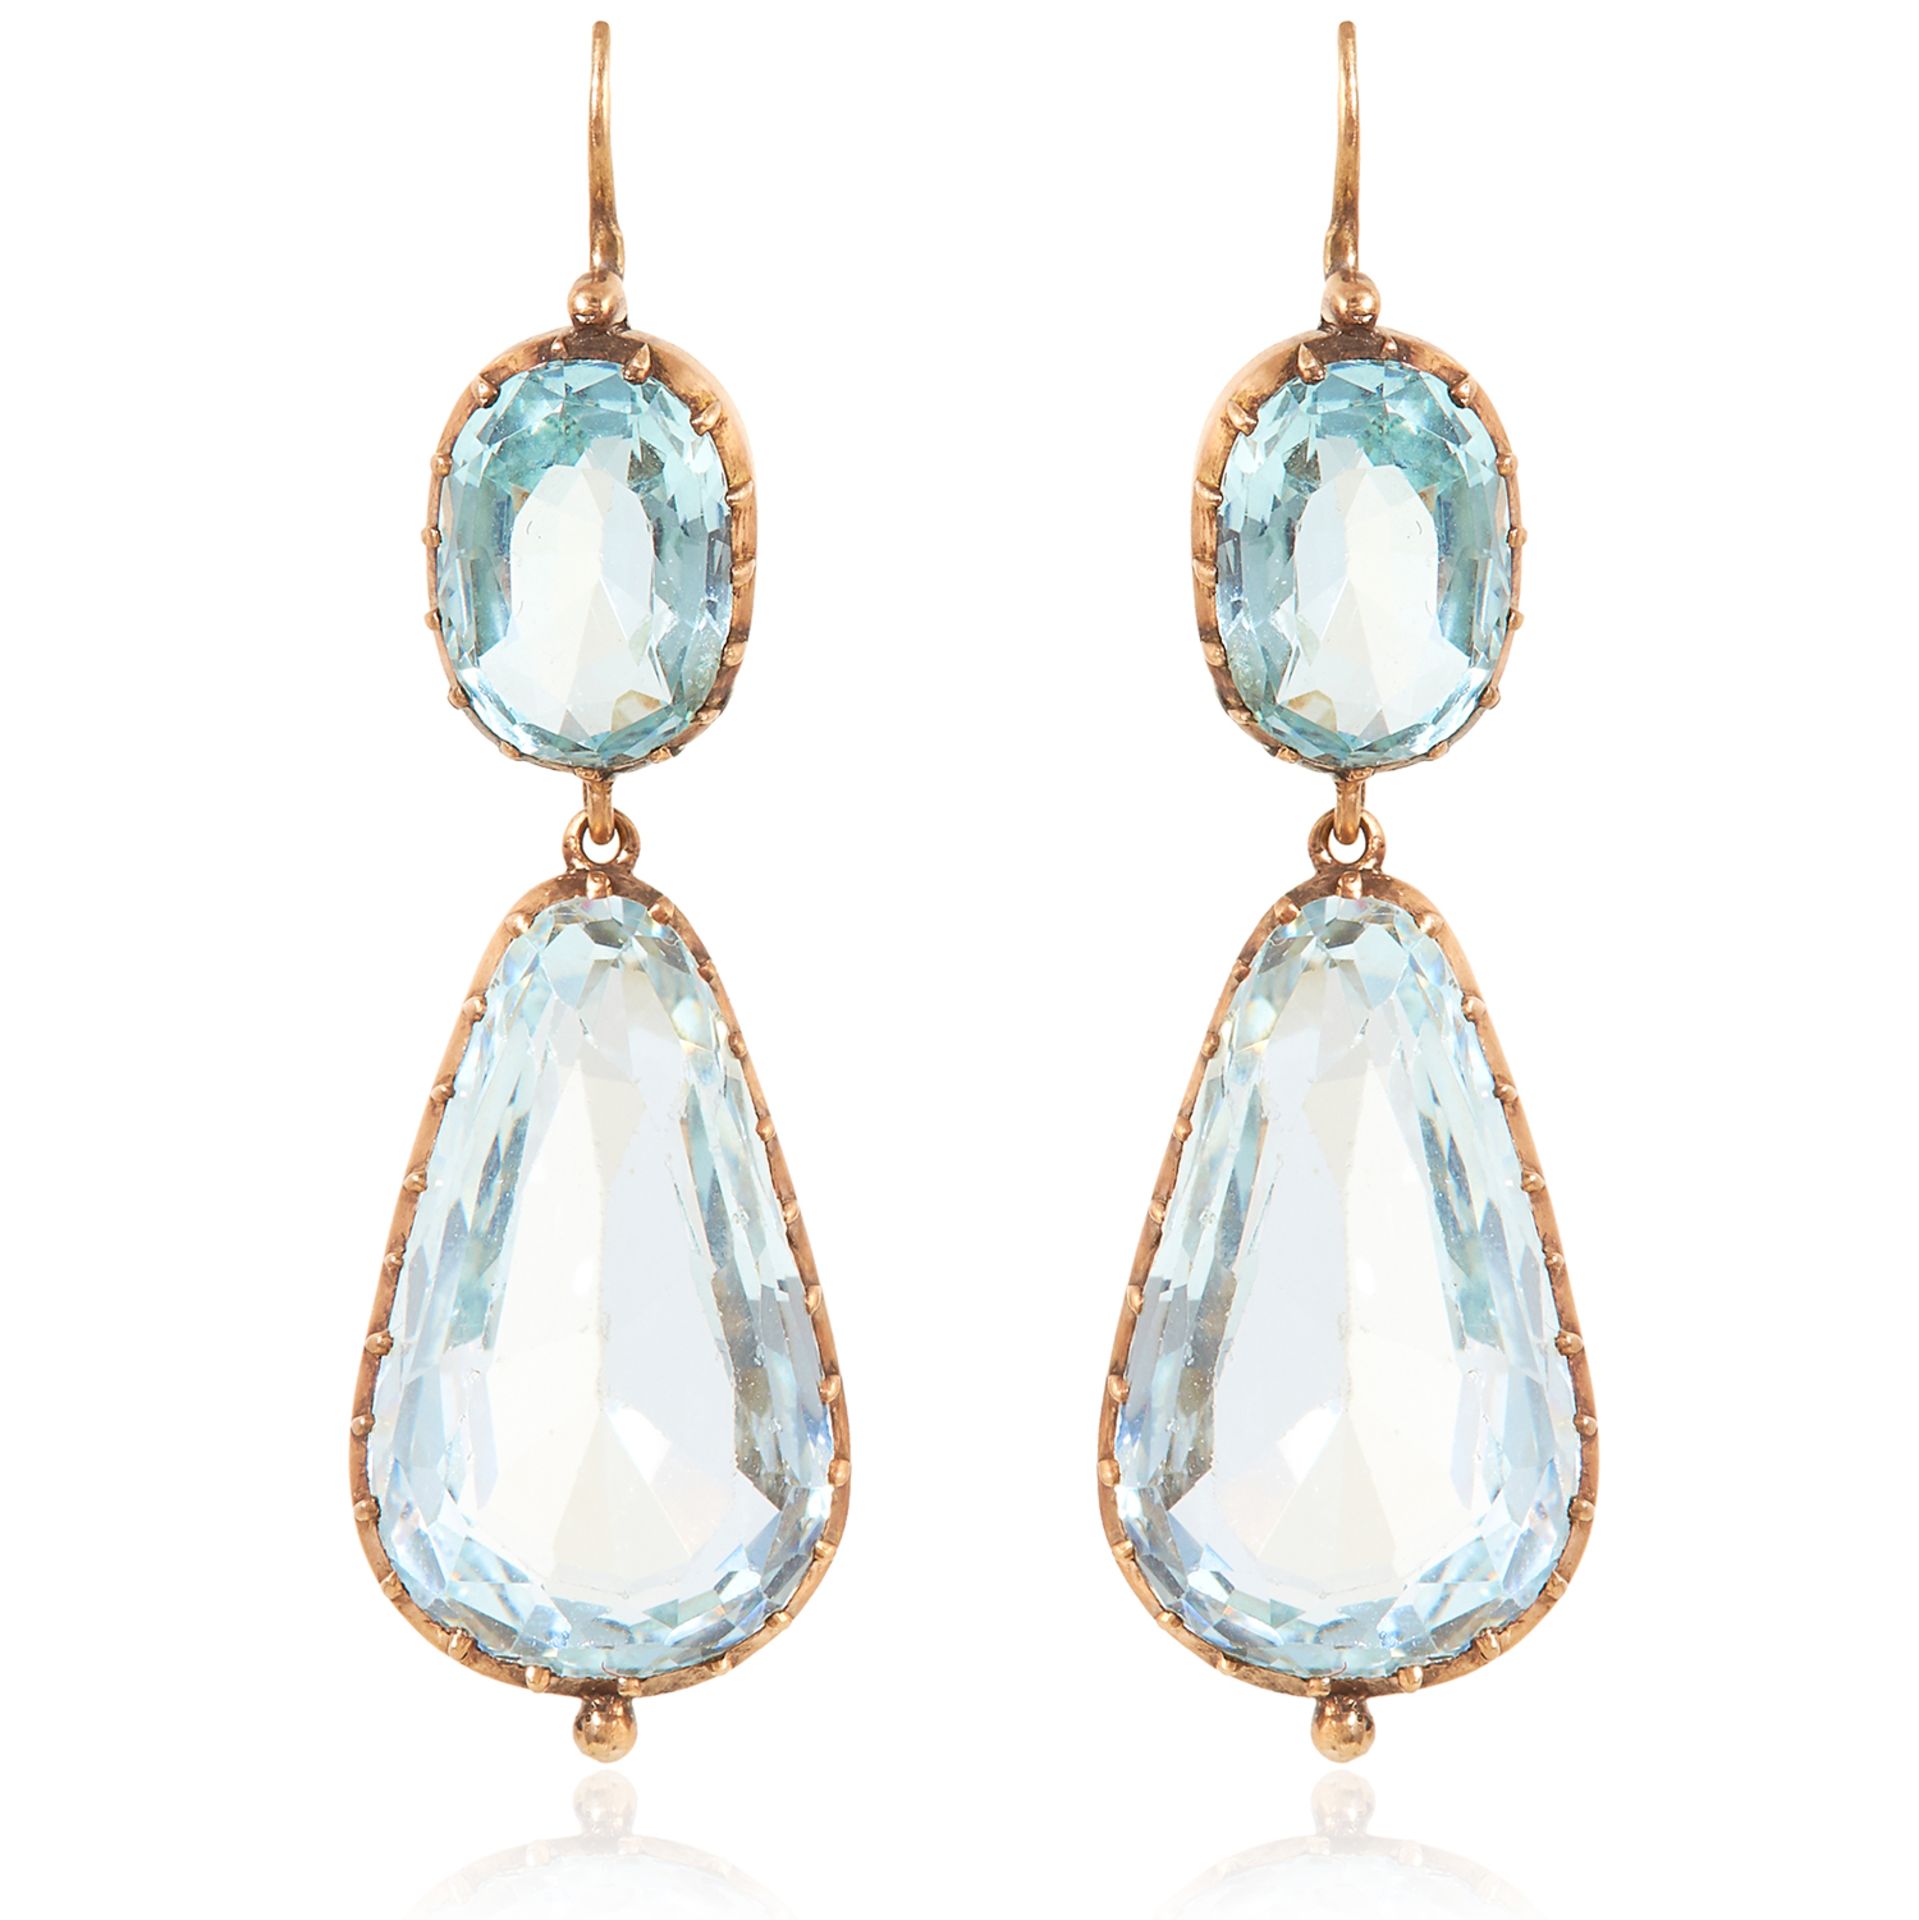 A PAIR OF ANTIQUE AQUAMARINE EARRINGS, EARLY 19TH CENTURY in high carat yellow gold, each formed